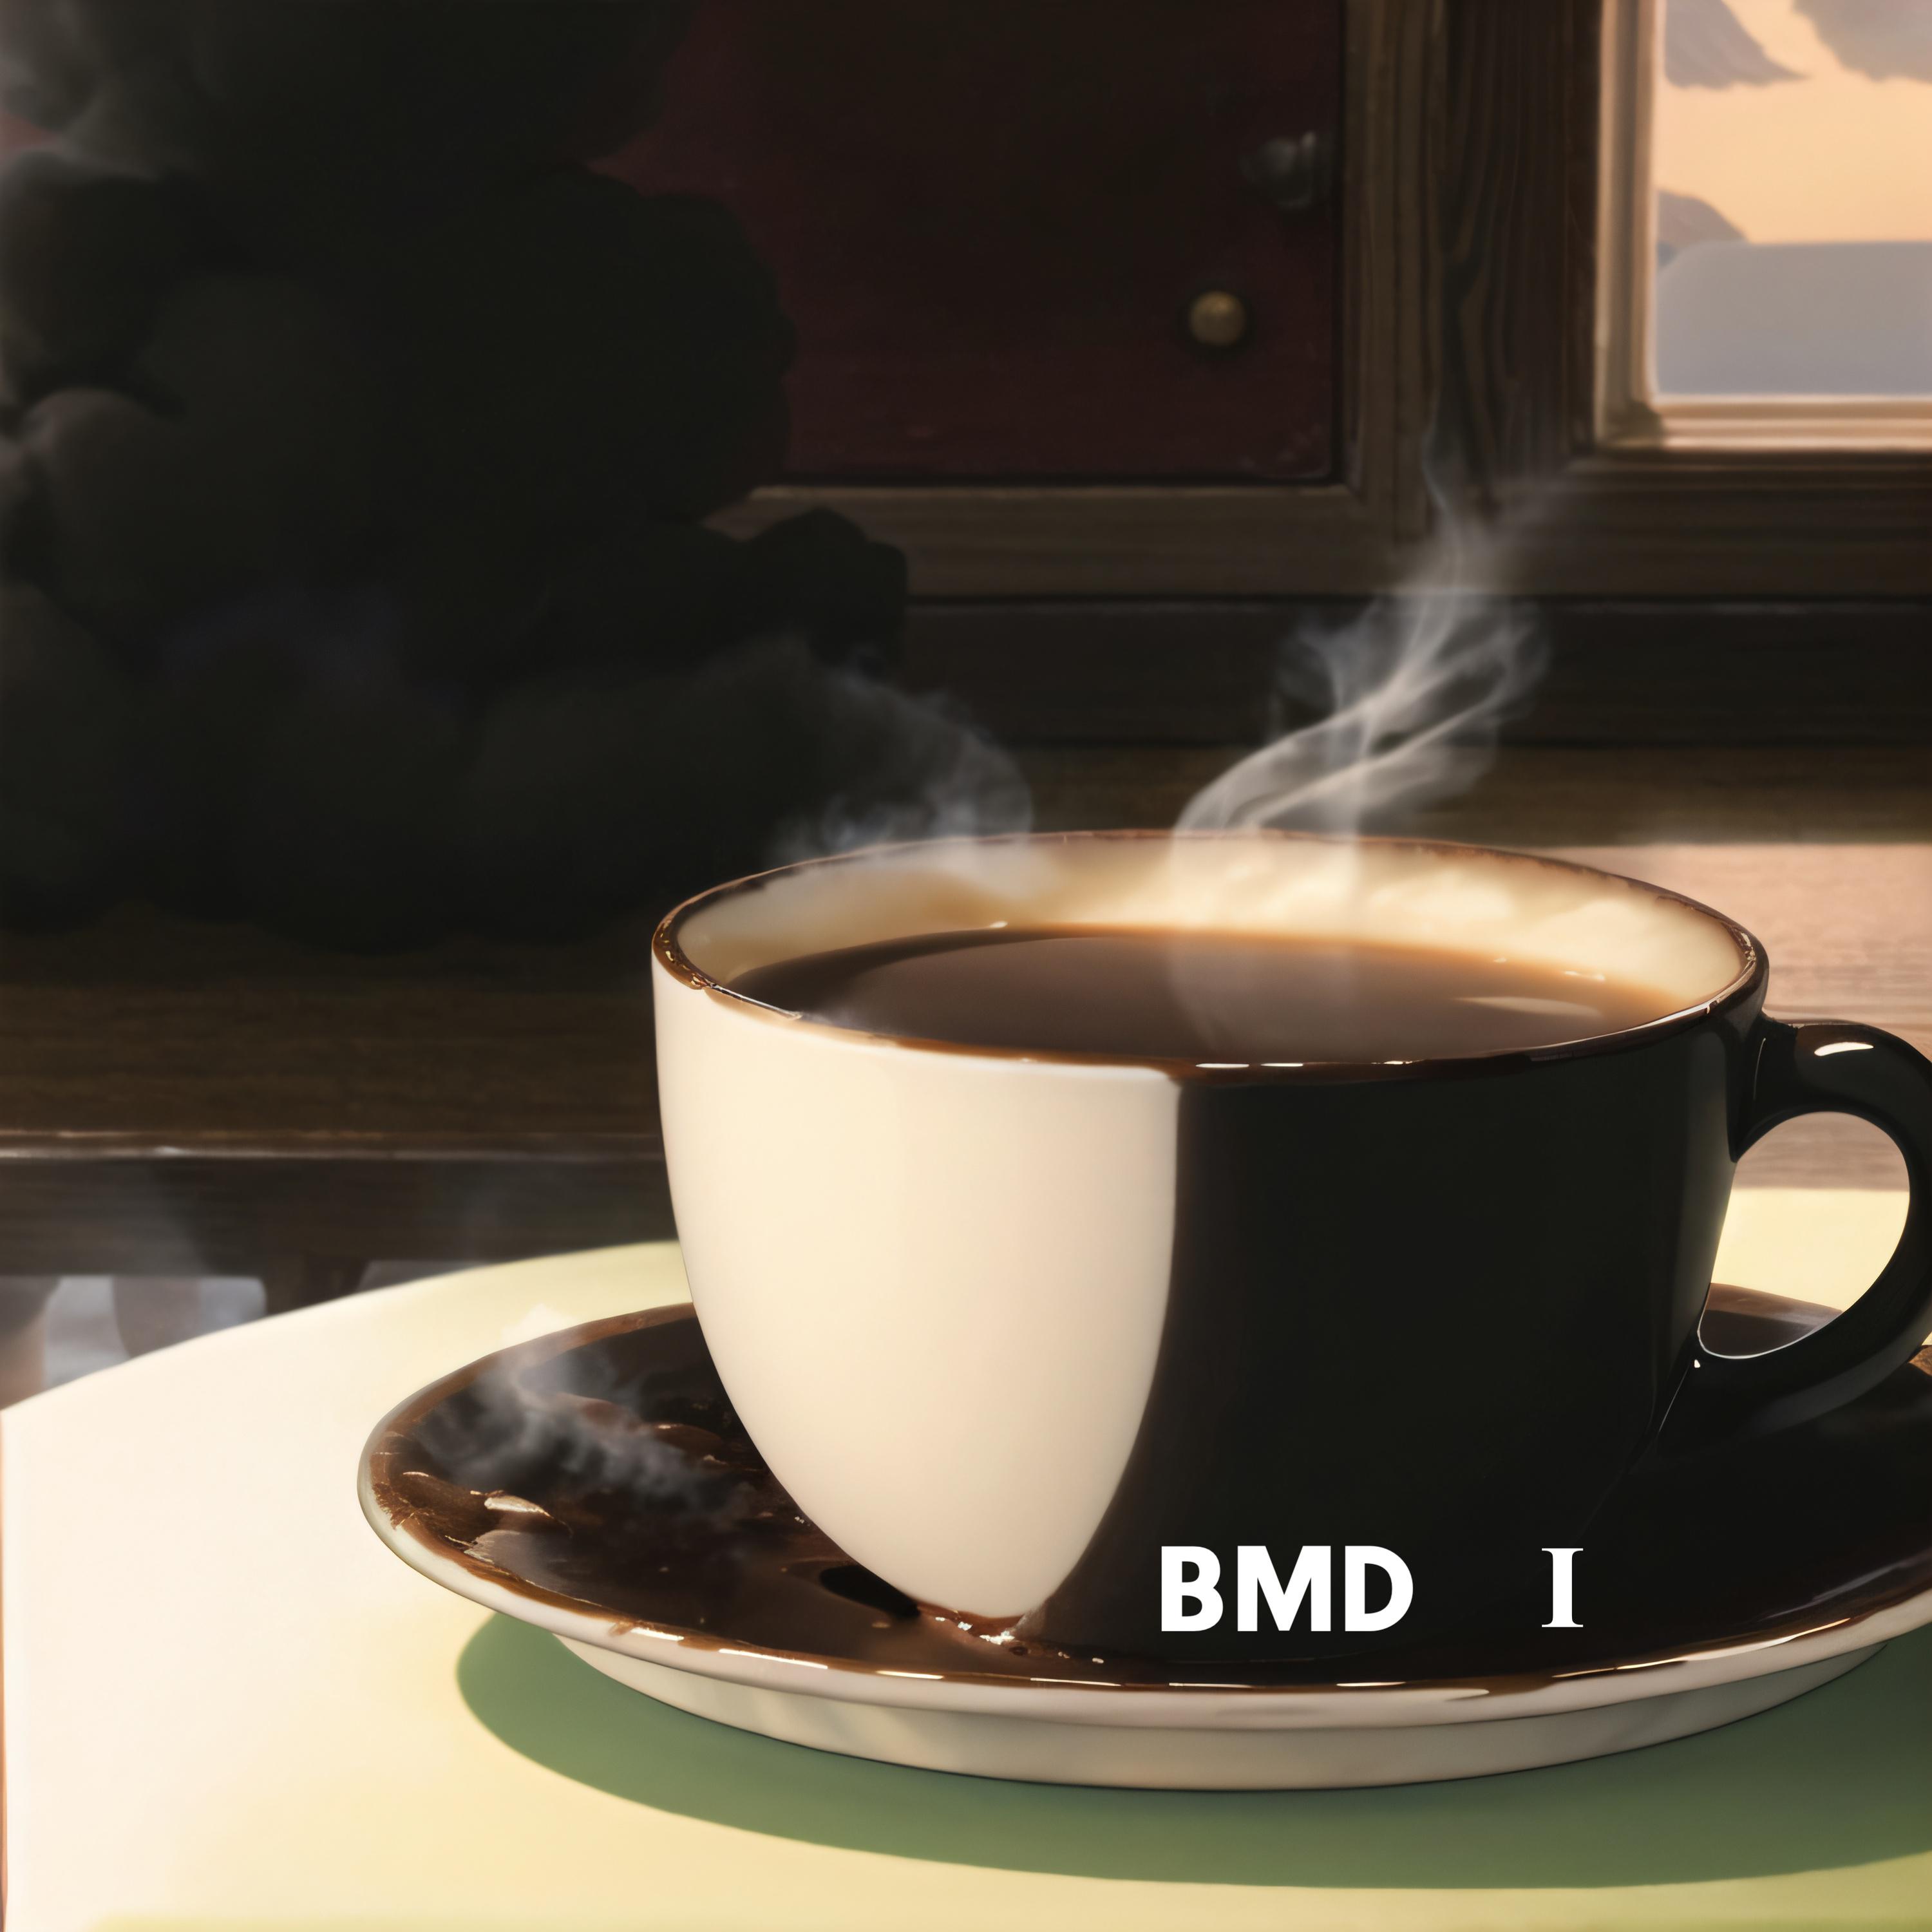 BMD - Is This...?